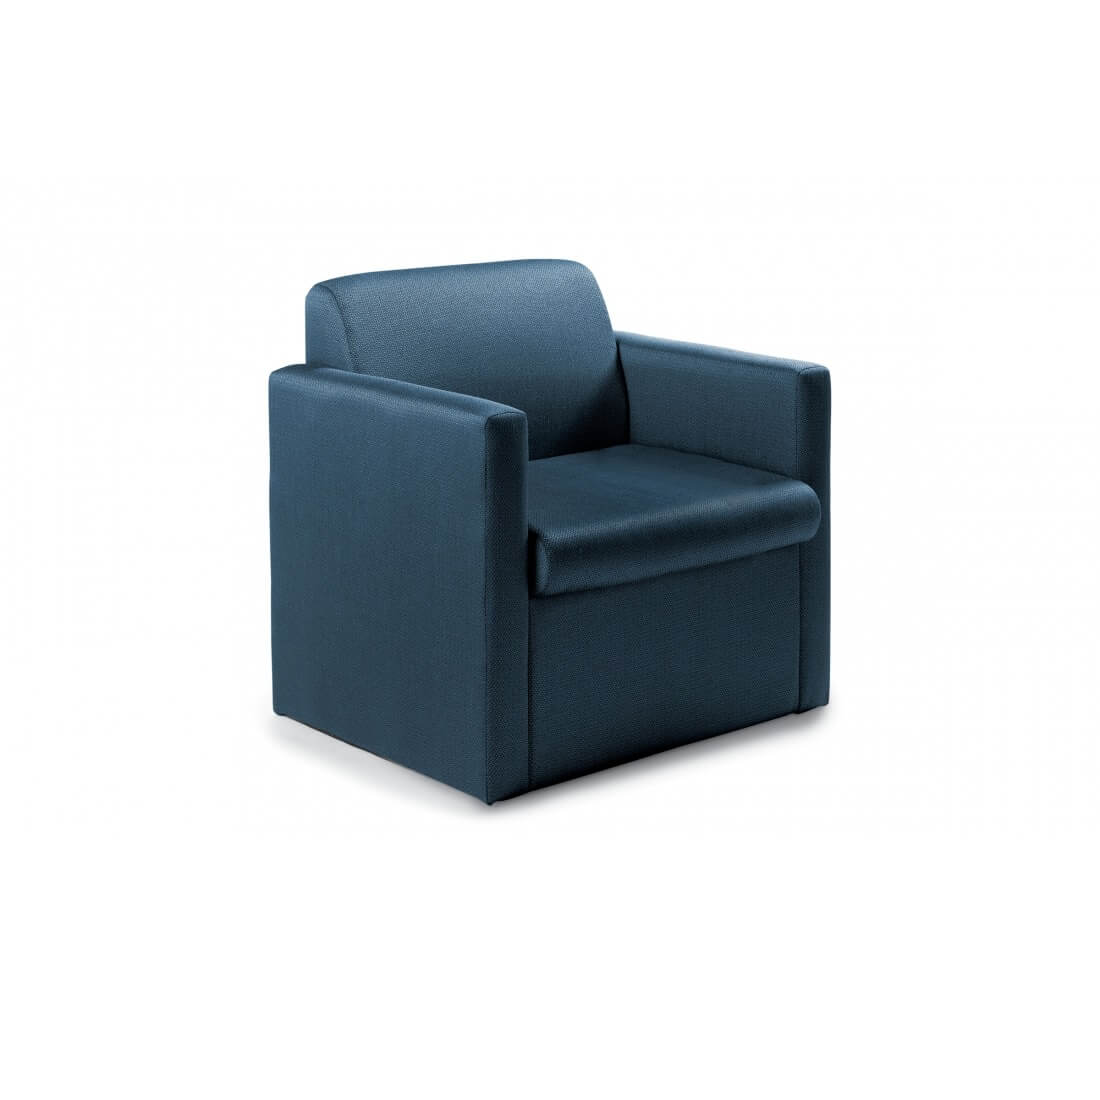 Global Braden 7871 Single Seat with Arms